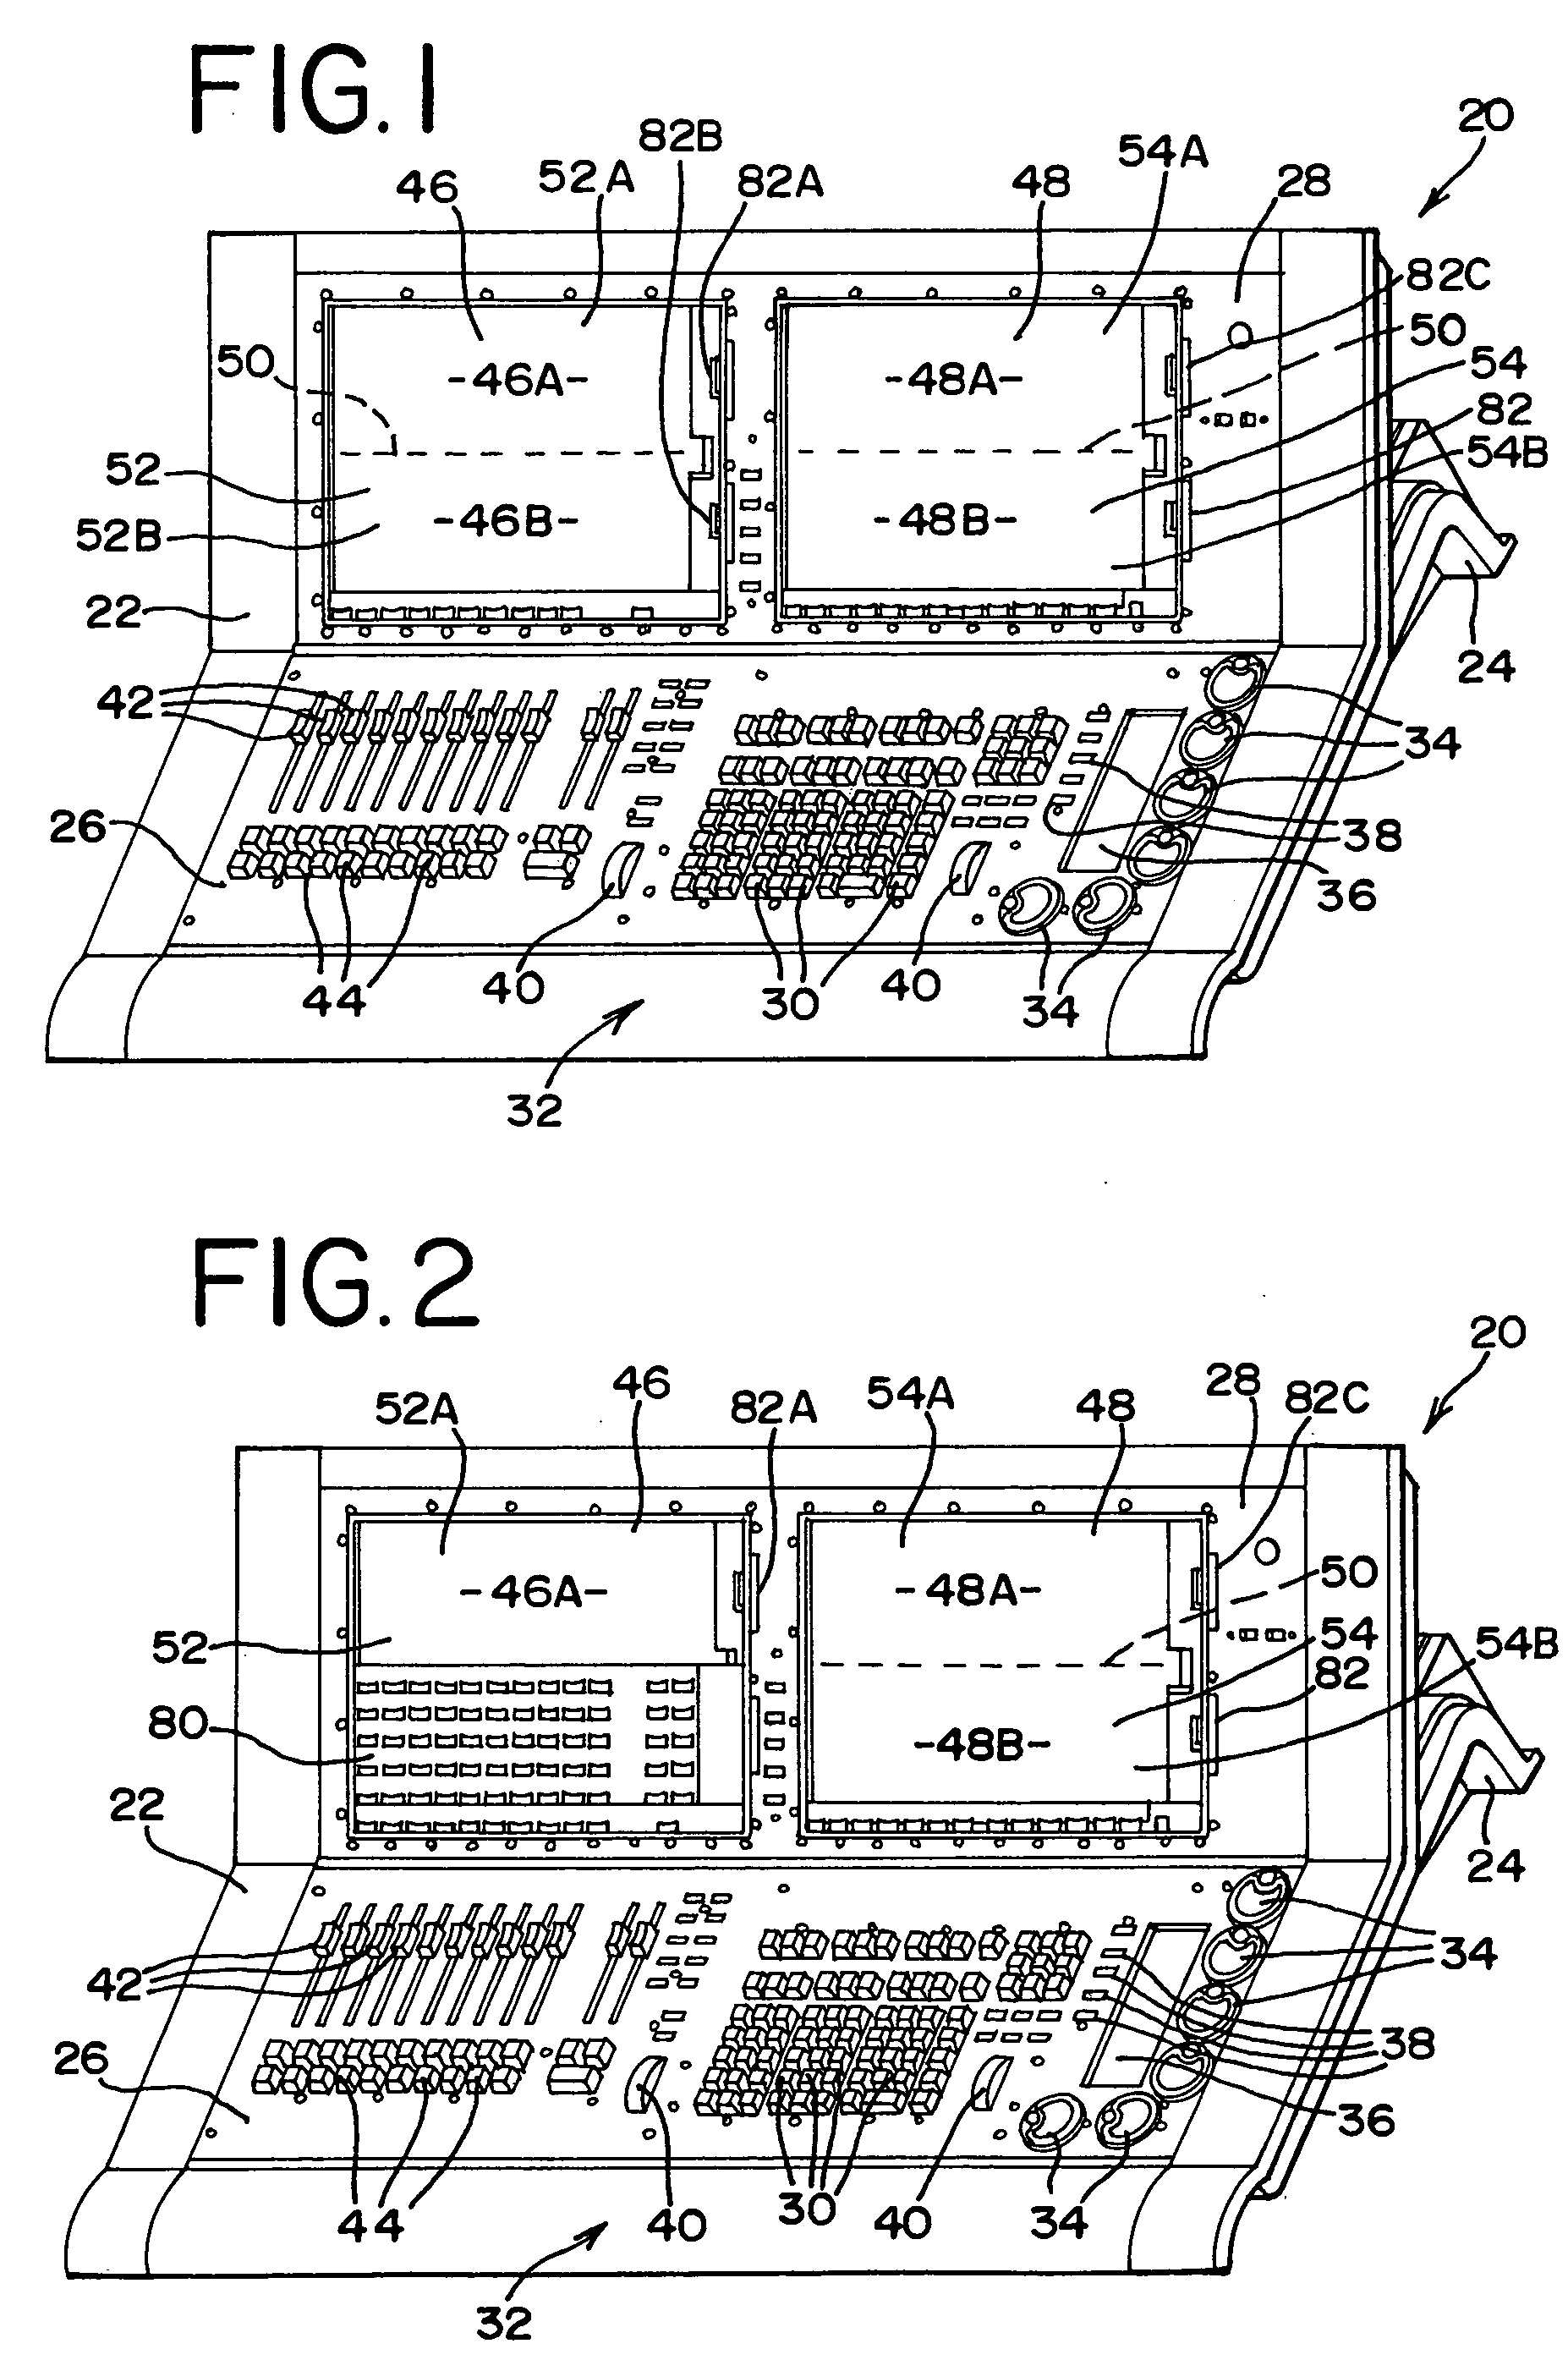 Segmented touch screen console with module docking